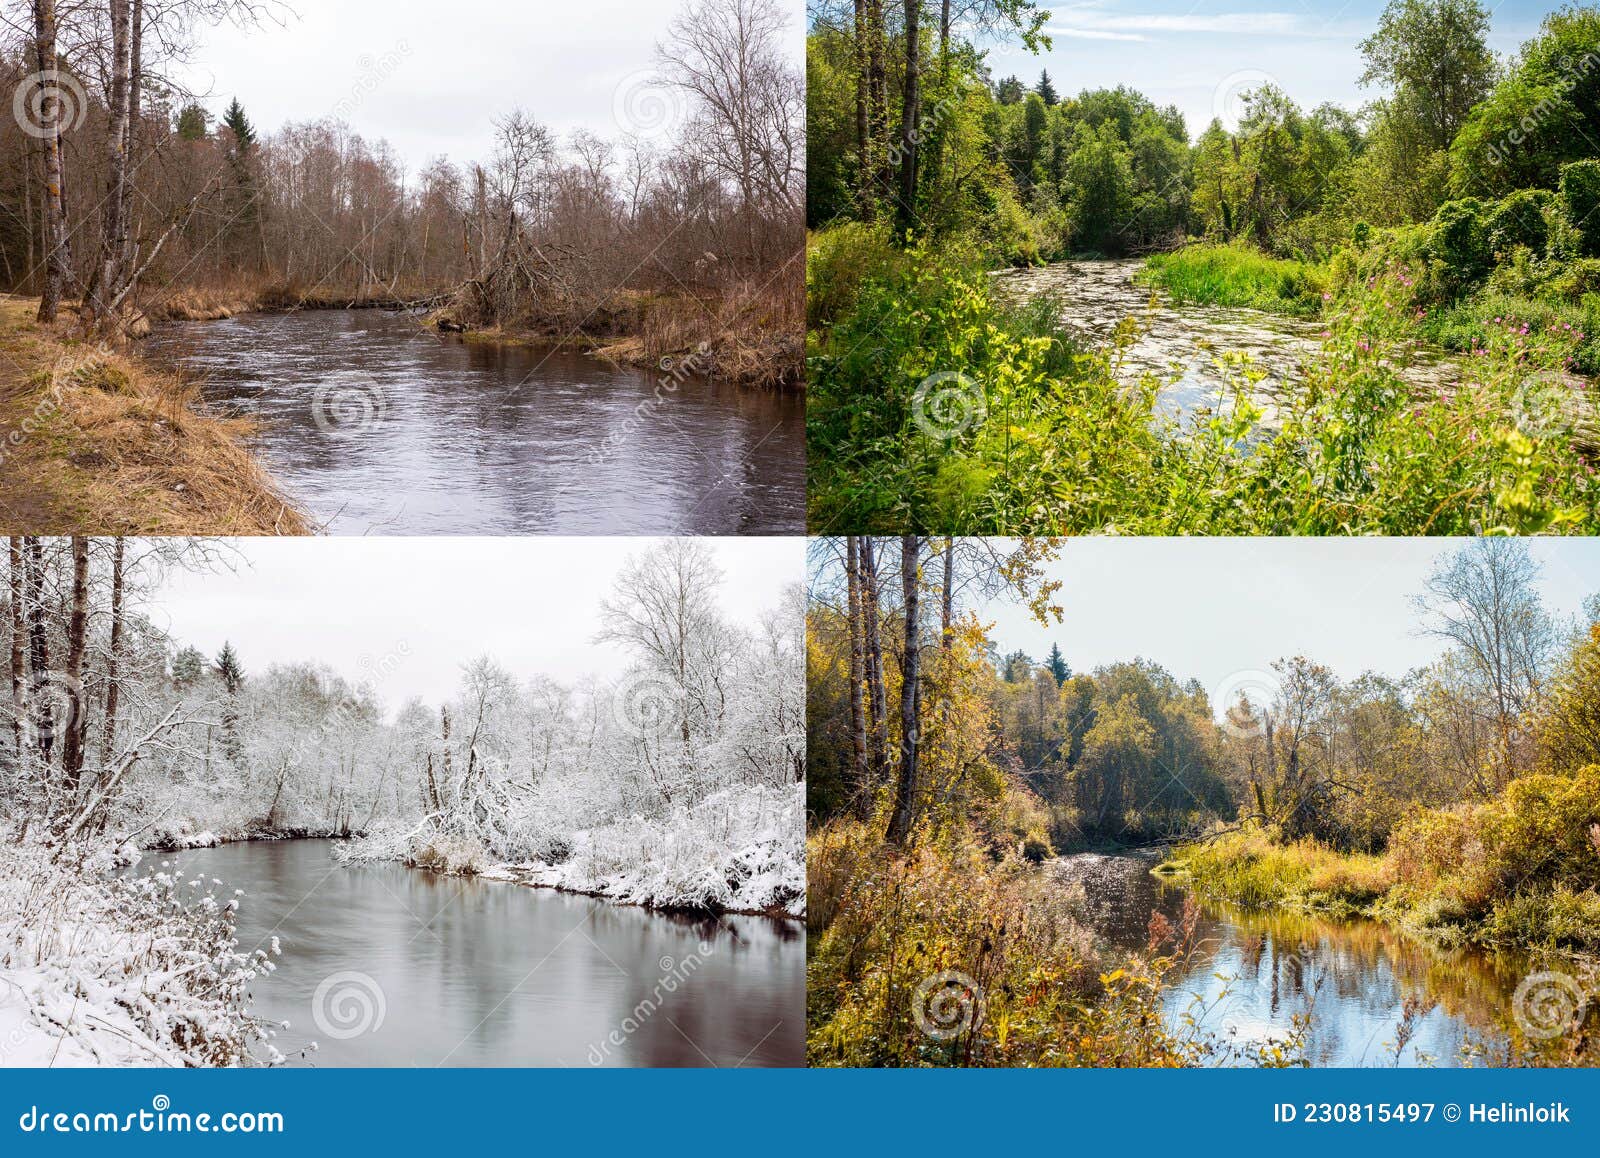 beautiful collage of 4 seasons, different pictures but same place of an river in wilderness. spring foliage, green fresh bright su